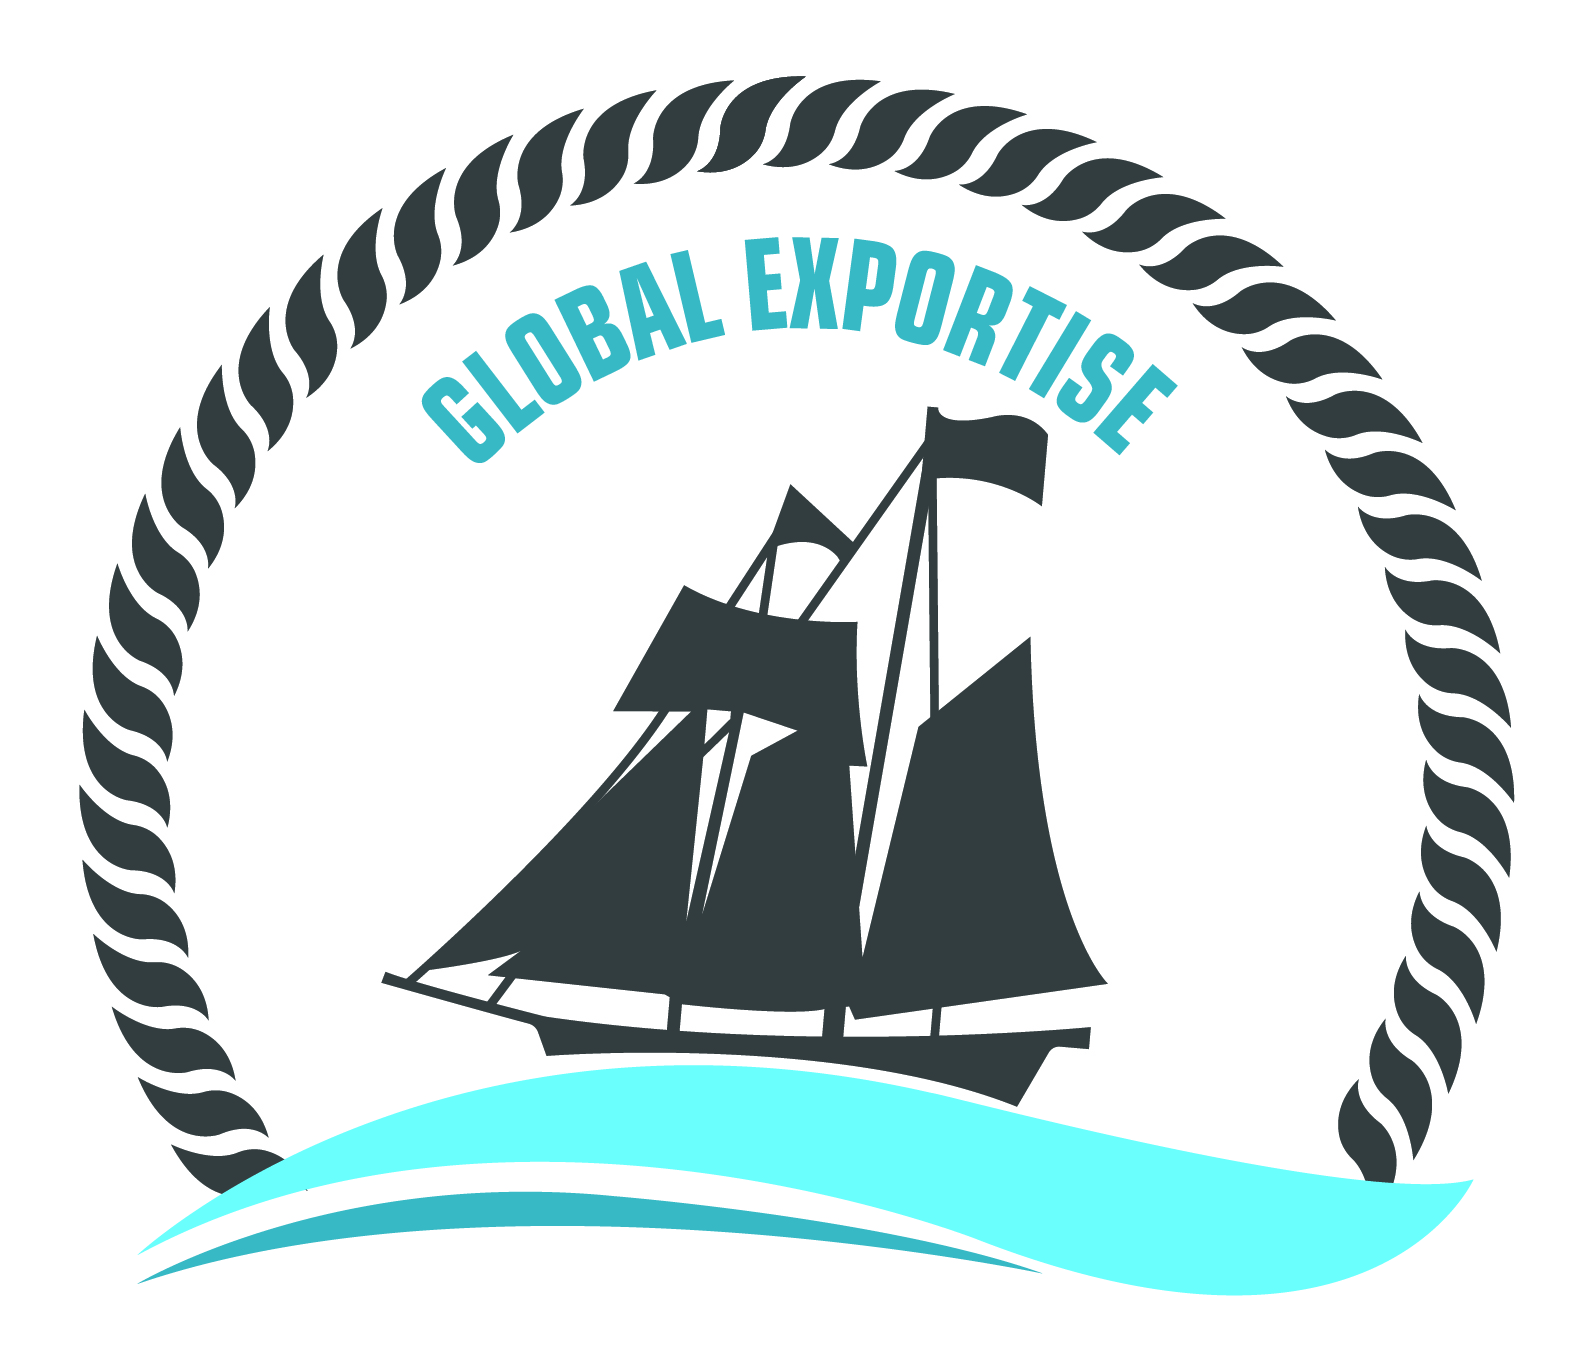 GLOBAL EXPORTISE